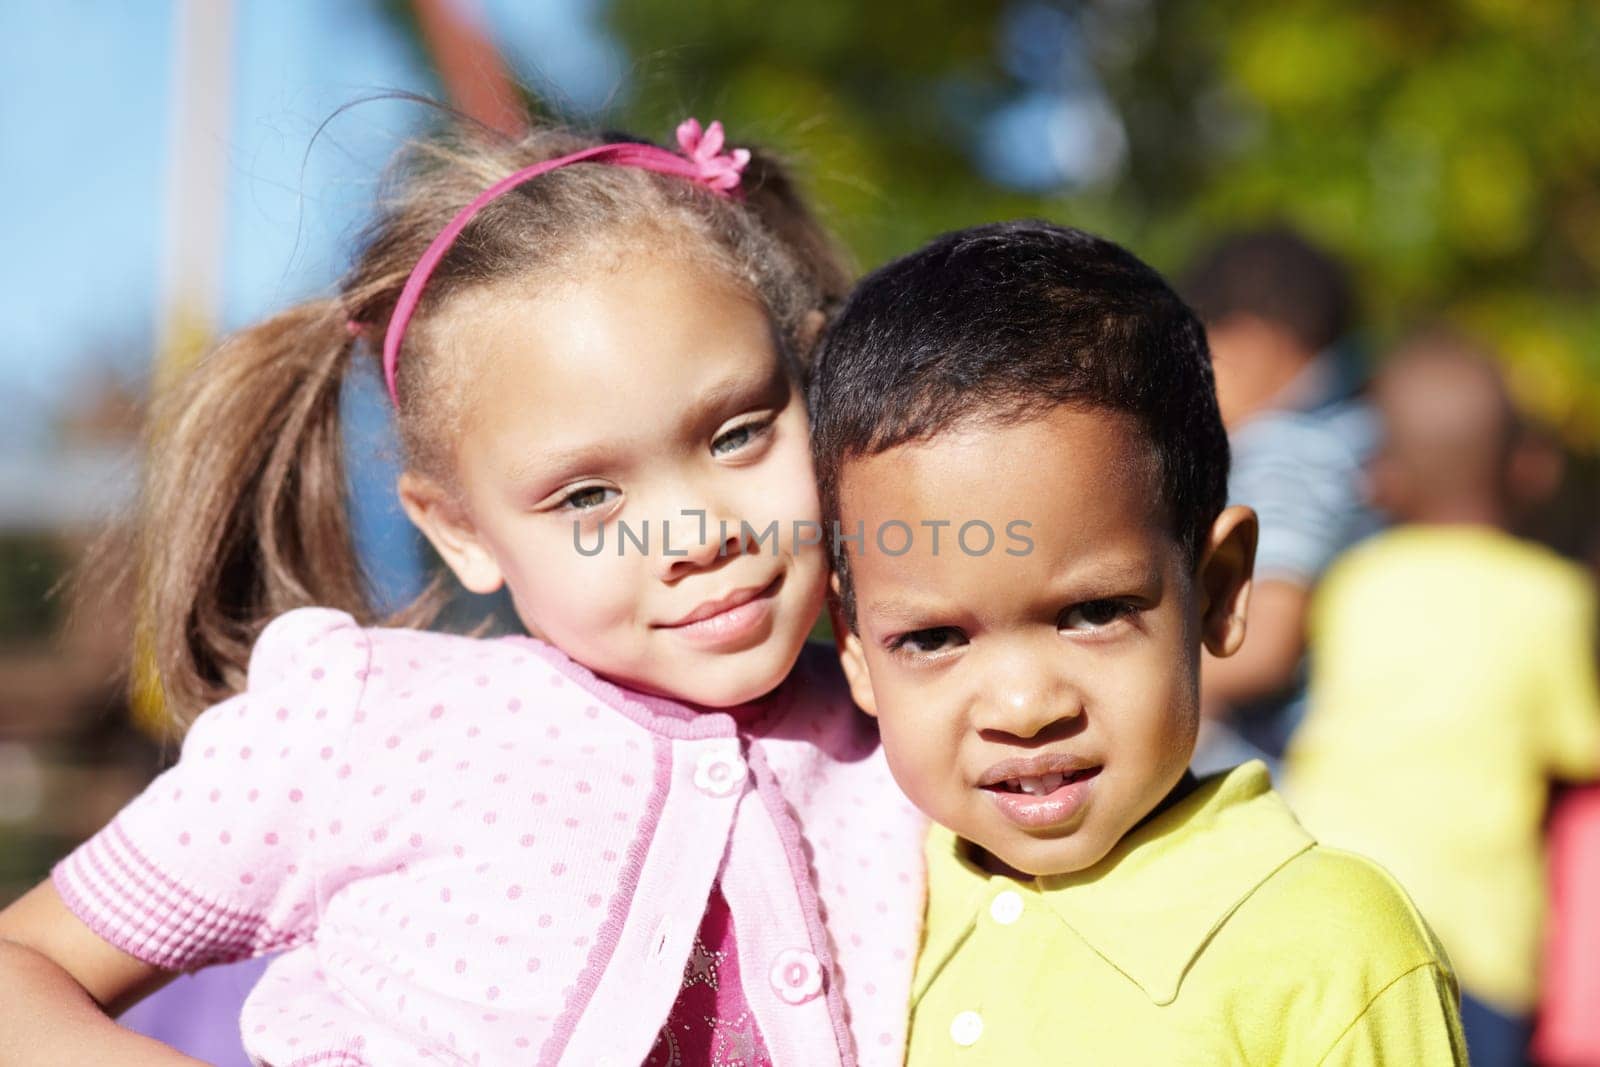 Happy, children and portrait of friends at a park playing outdoor at break time at kindergarten. Happiness, smile and kids embracing and having fun together in nature on the playground at school